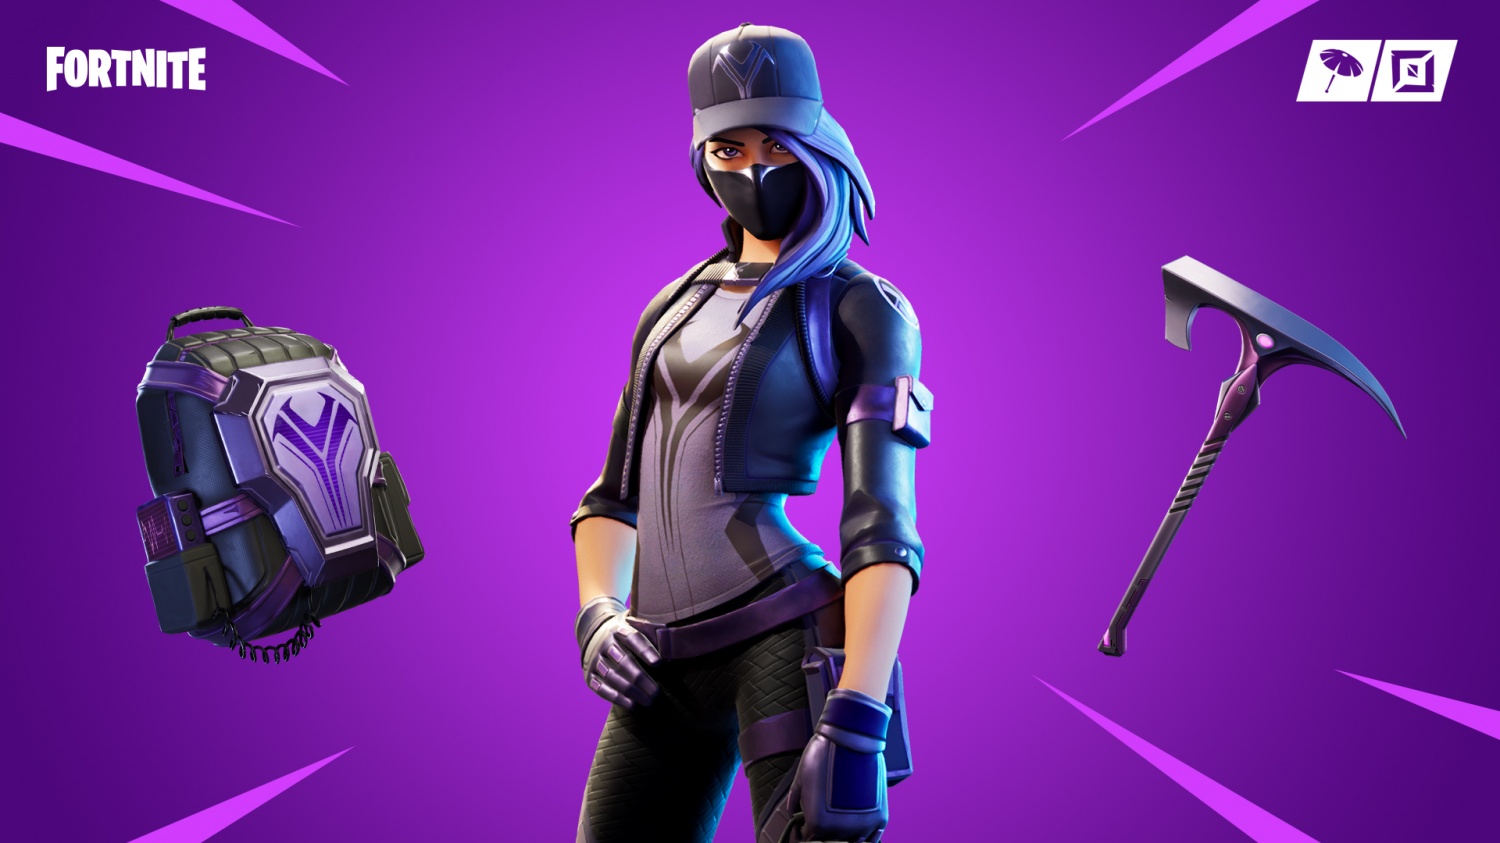 Fortnite Characters Locked Fortnite How To Unlock Alternate Styles For Remedy Vs Toxin Skin Tech Times